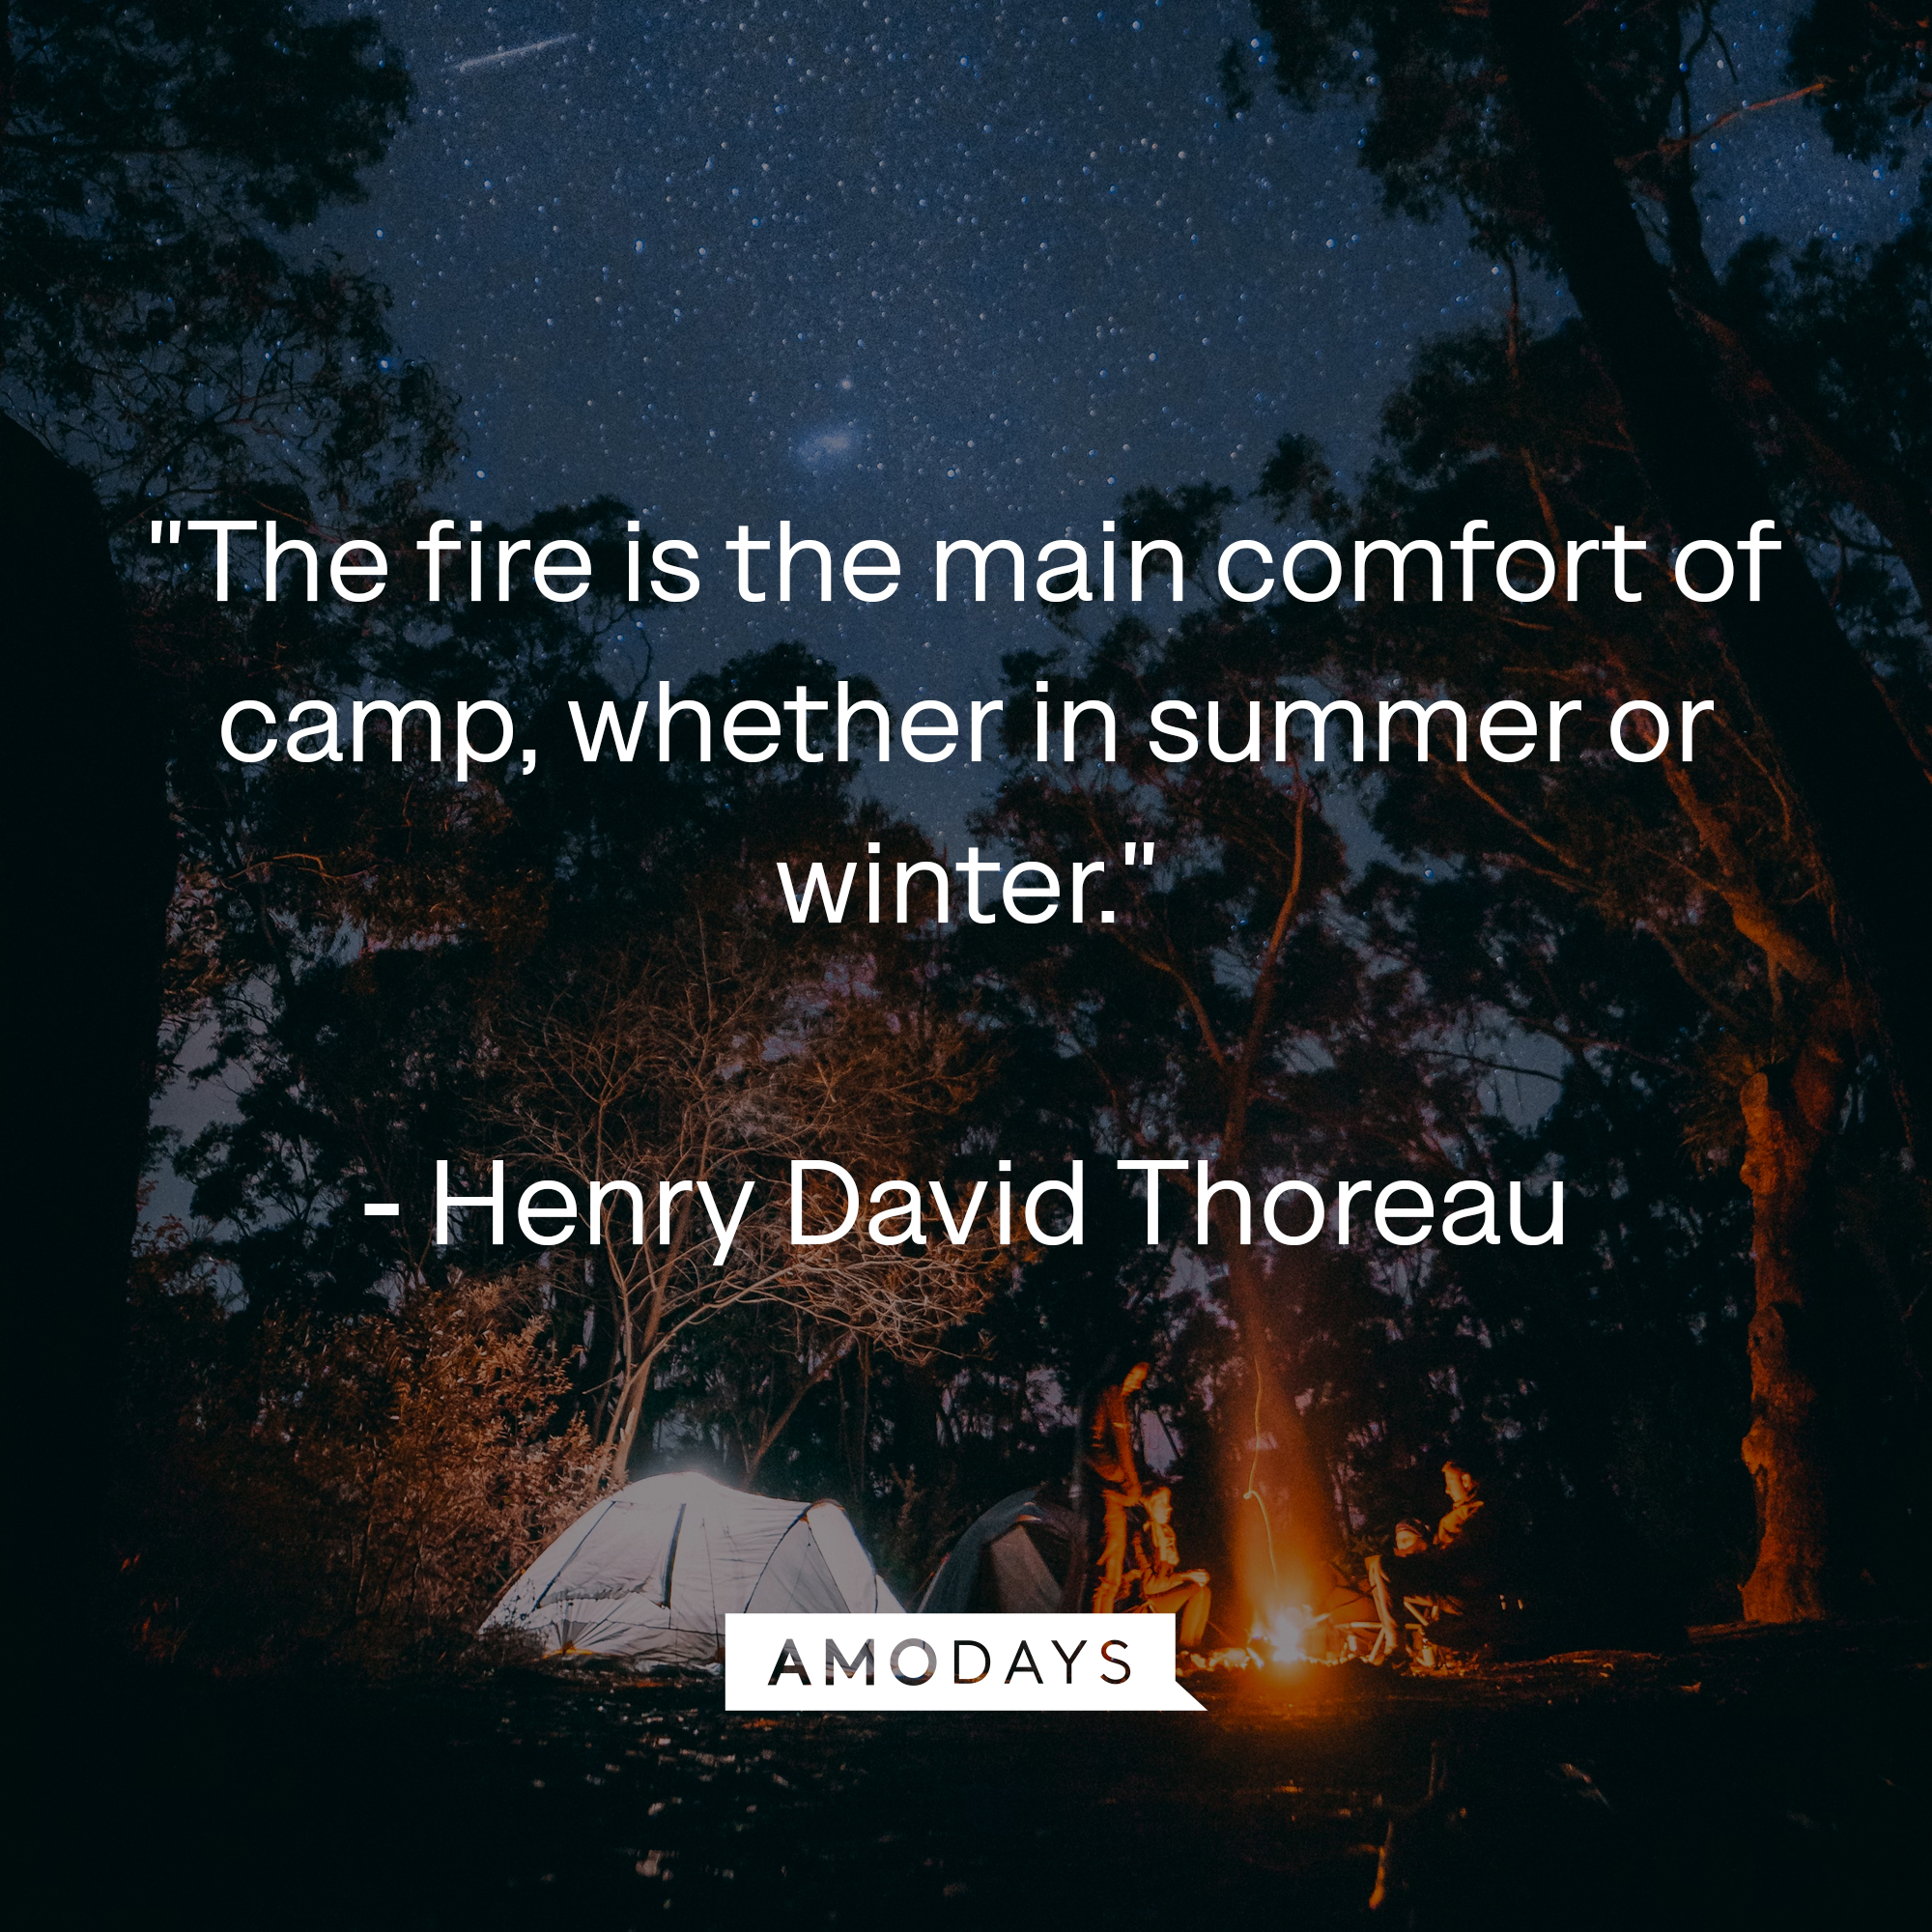 Henry David Thoreau's quote: "The fire is the main comfort of camp, whether in summer or winter." Source: Countryliving